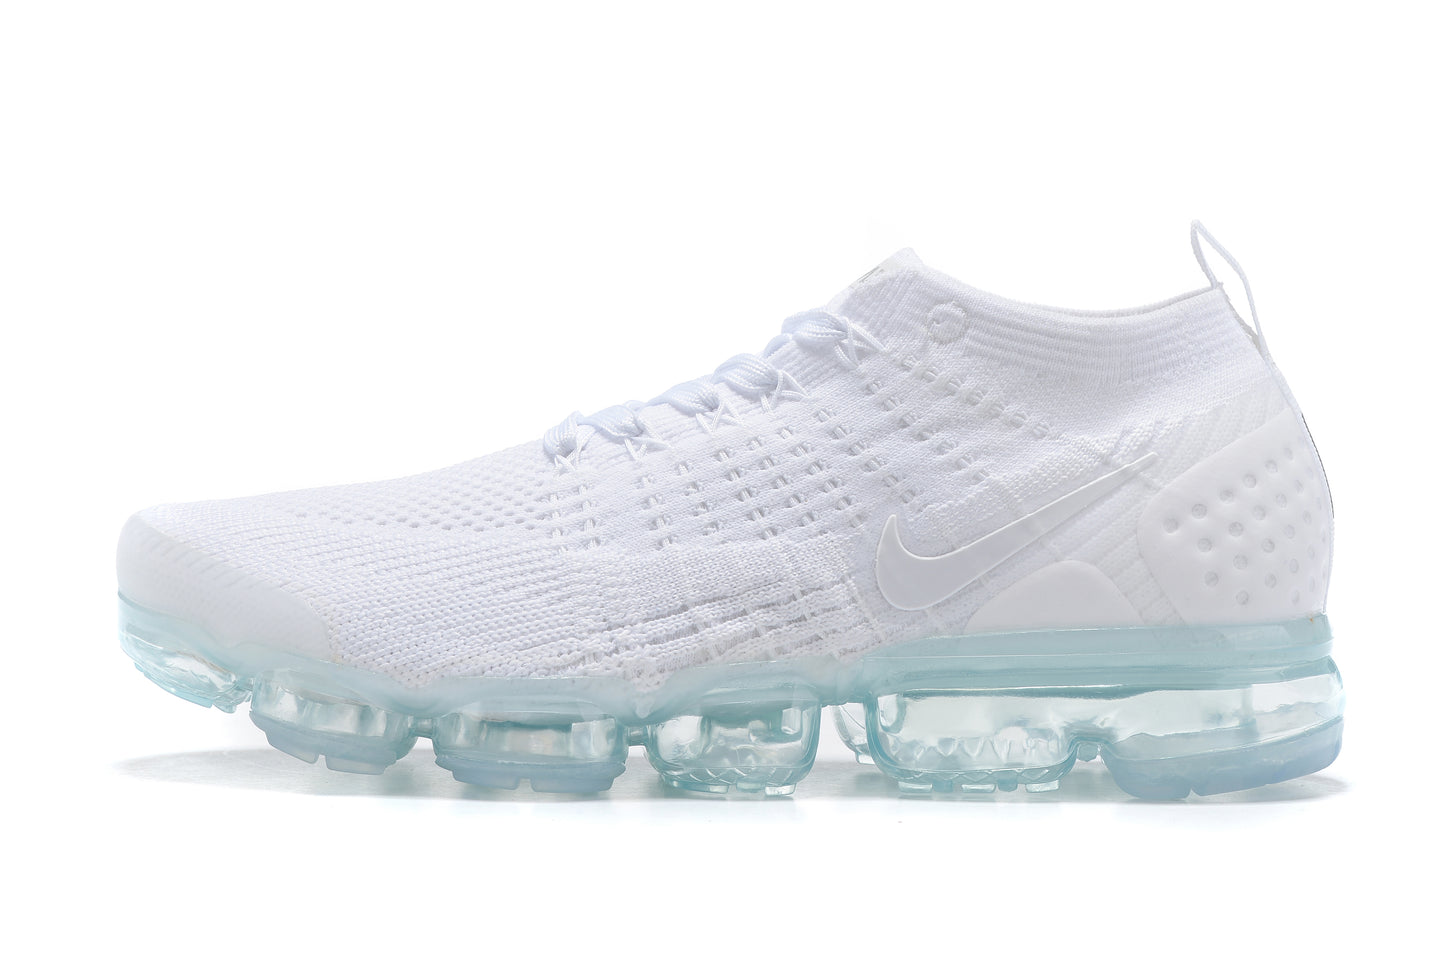 Vapormax Flyknit - whatever on 